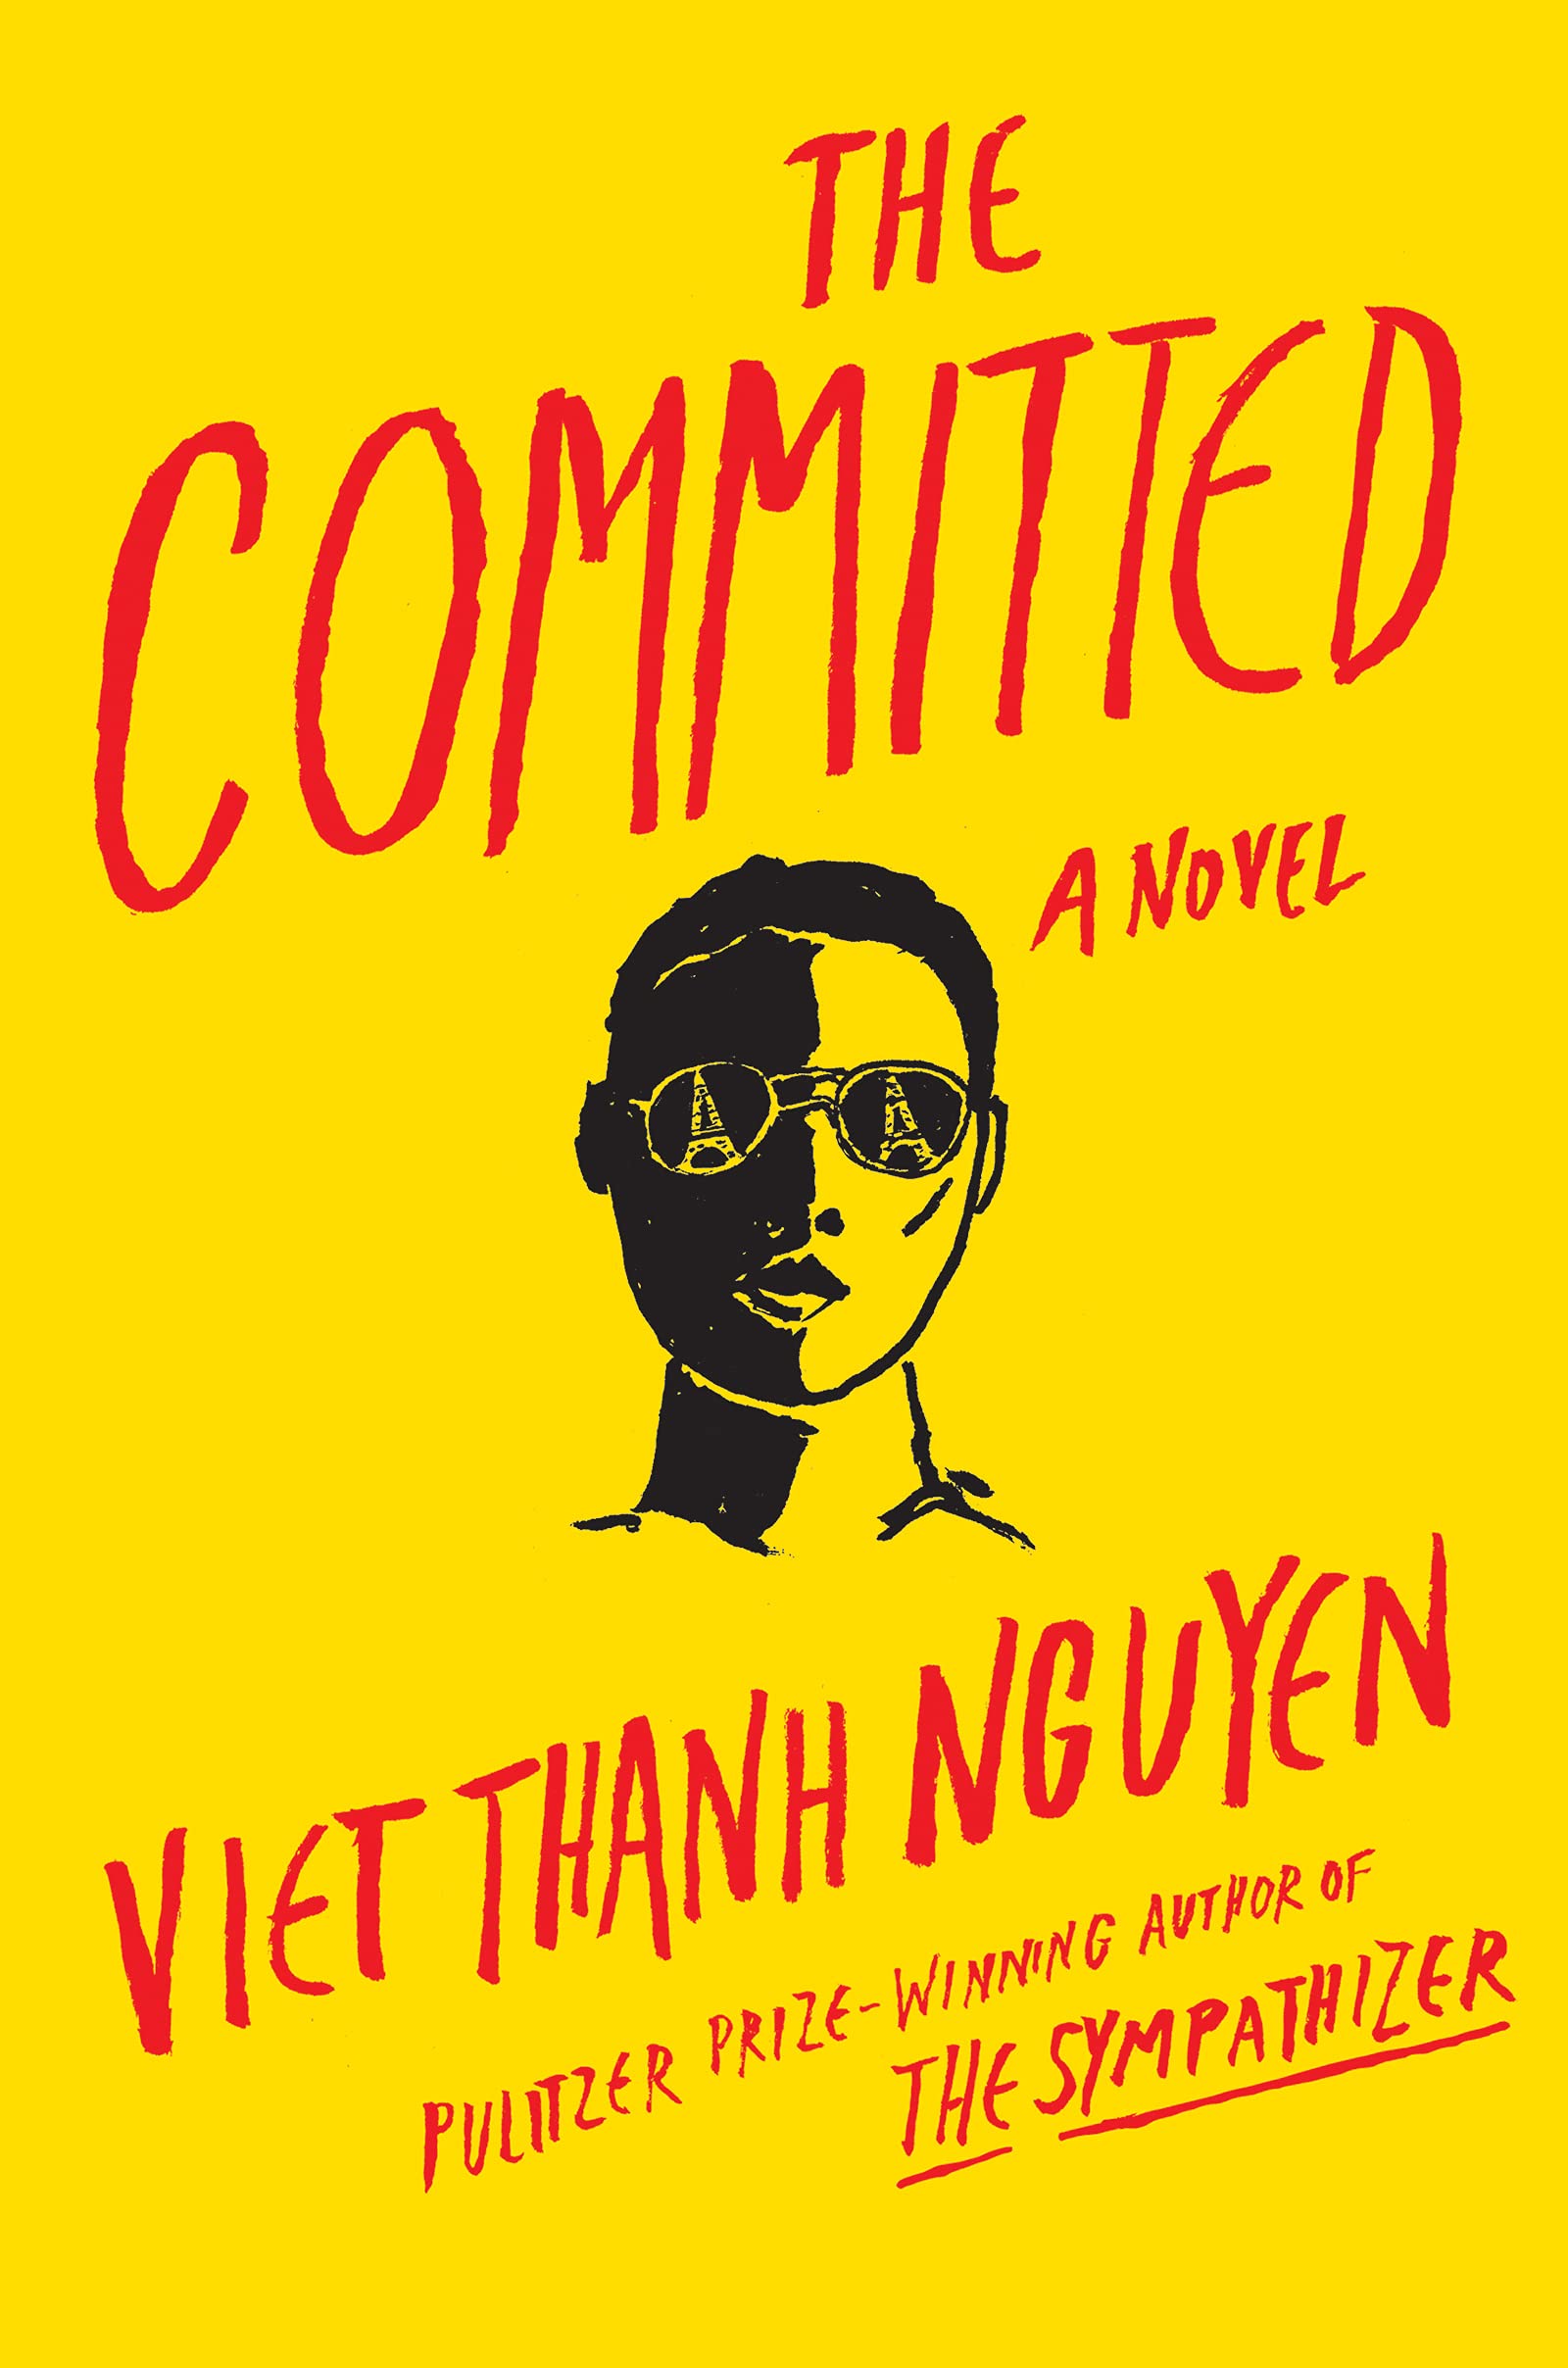 Cover of The Committed by Viet Thanh Nguyen, showing a drawing of a man on a yellow background with red text